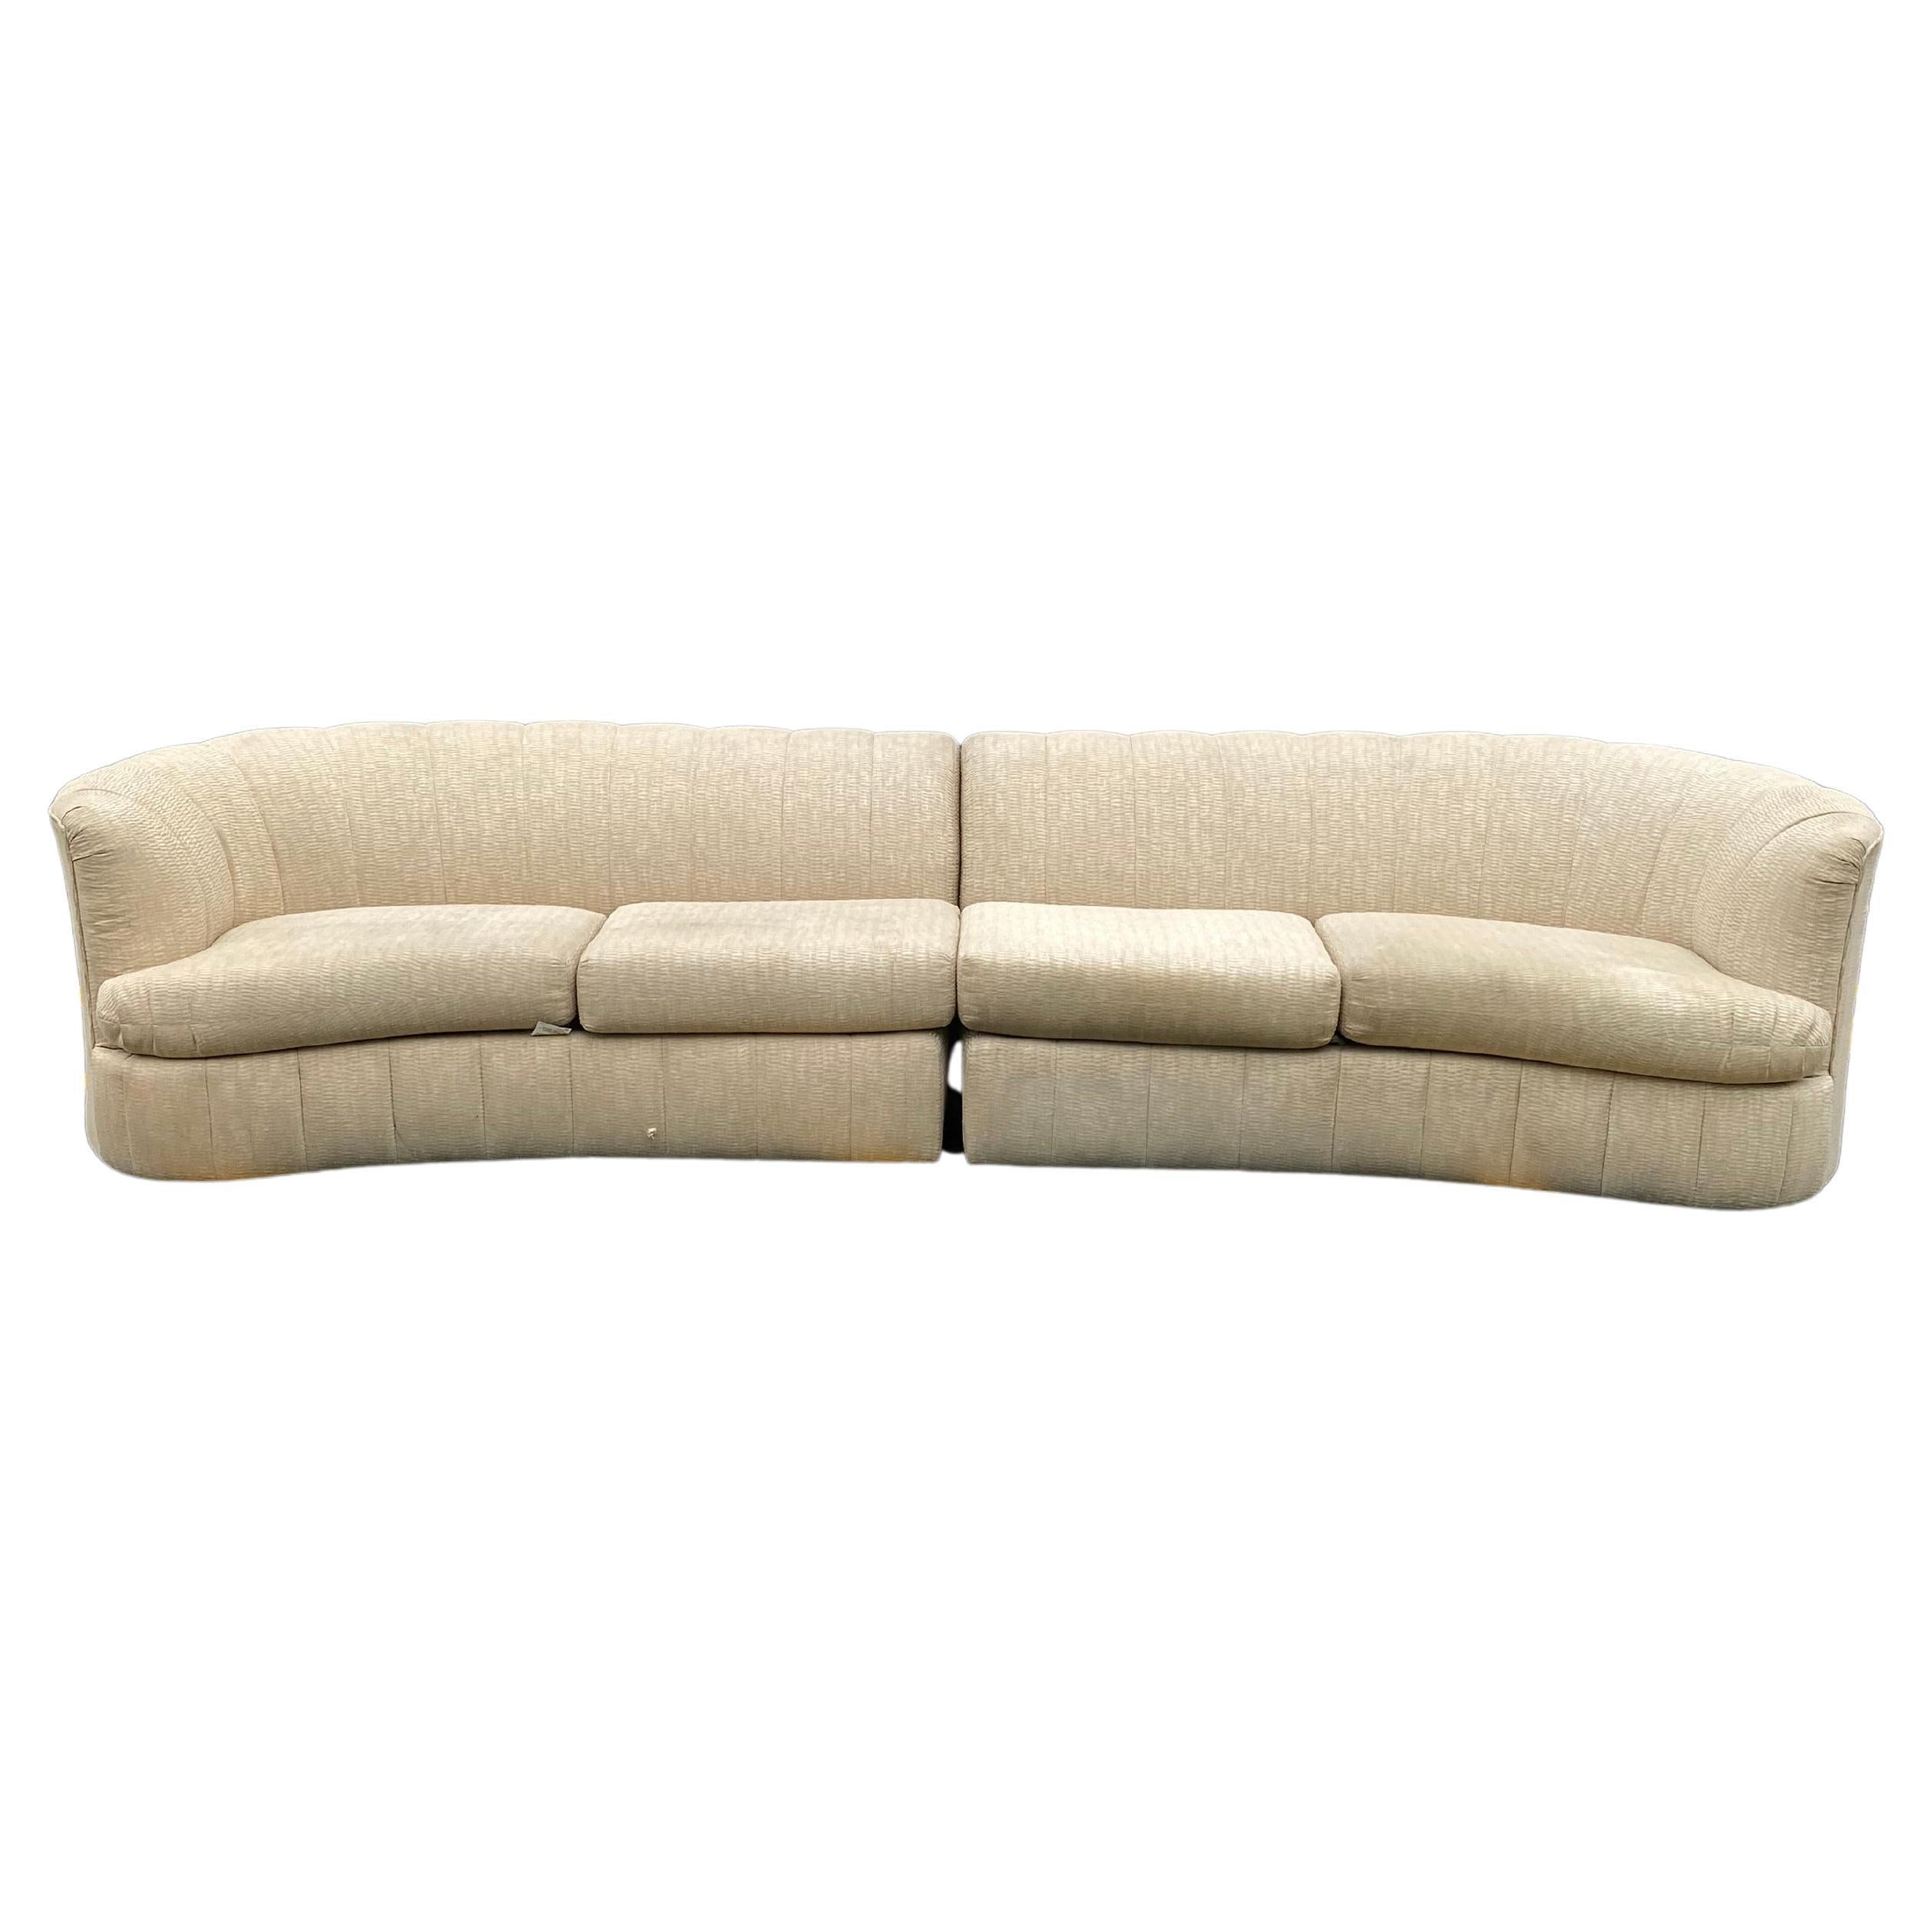 1980s Weiman Curved Channel Back Two Piece Sectional For Sale